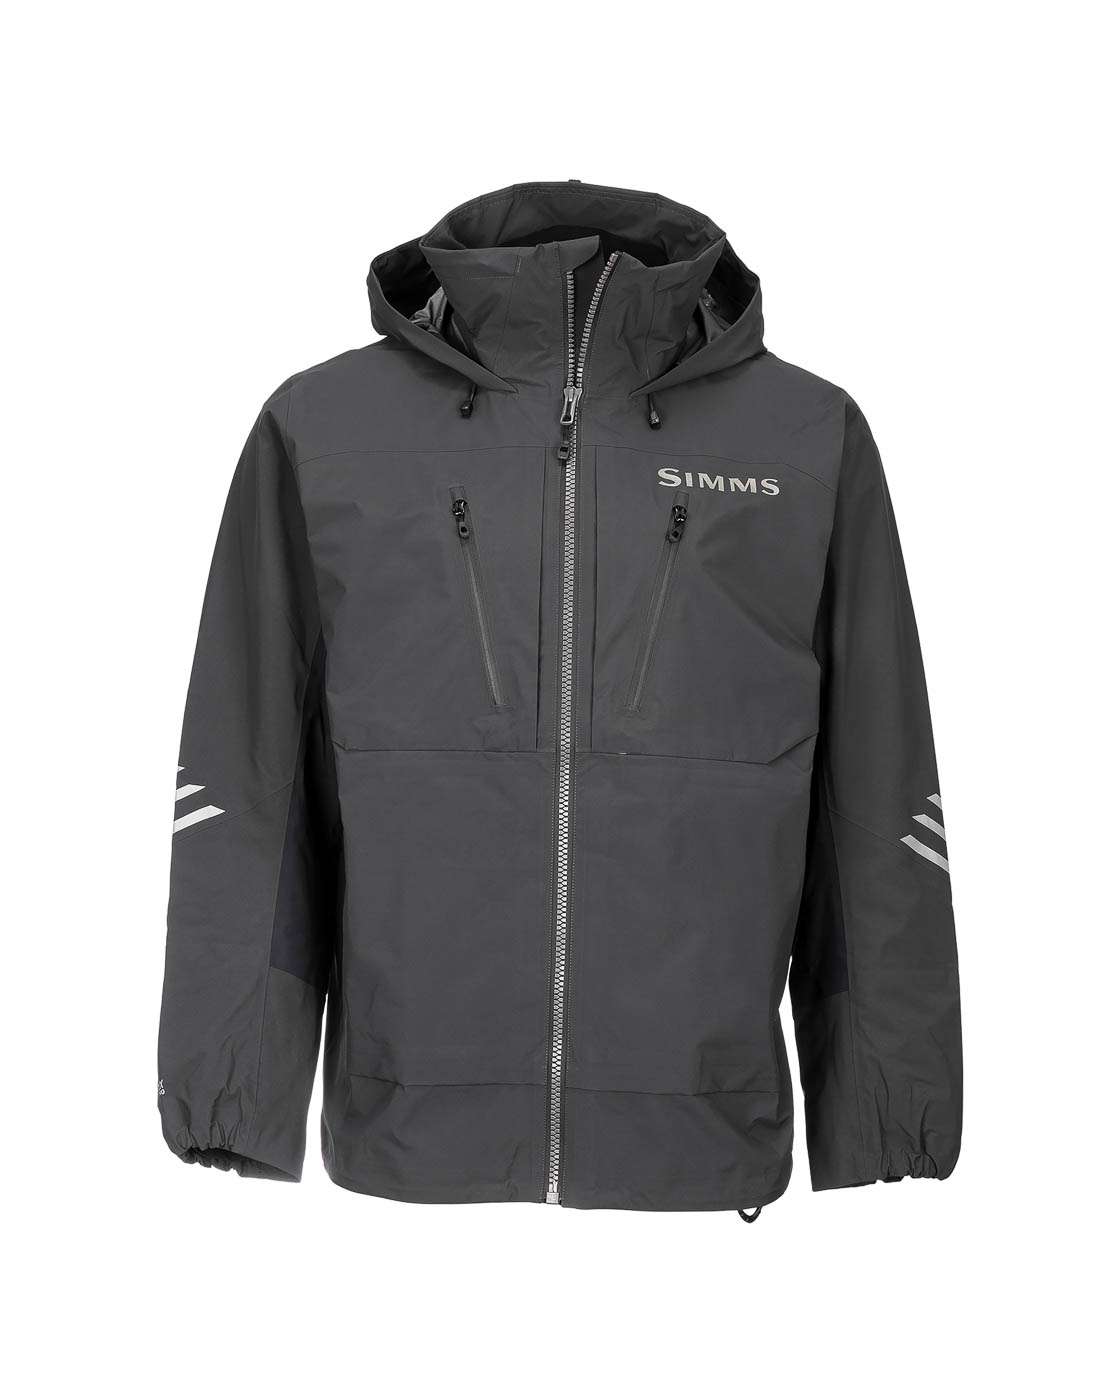 <p><strong>Simms Pro Dry Jacket</strong></p><p>This tournament performance mainstay now offers greater durability with increased denier face fabric, while maintaining the lightweight feel with a new, modern look. GORE-TEX durable waterproof, breathable 3-layer fabric guarantees the wearer stays dry, no matter how harsh the conditions. The hood features three-point adjustability, so wind and water pass through drain holes at the base of the back collar. A bonded brim with a rain-gasket liner and high-collar provides extreme weather protection. A water-tight, exposed dual chest pocket and interior zippered stretch-woven pocket are ideal for quick access to essentials. Zippered handwarmer pockets with an adjustable waist-cinch provide warmth when needed. Articulated sleeves provide ample range of motion. $599.95. <a href=